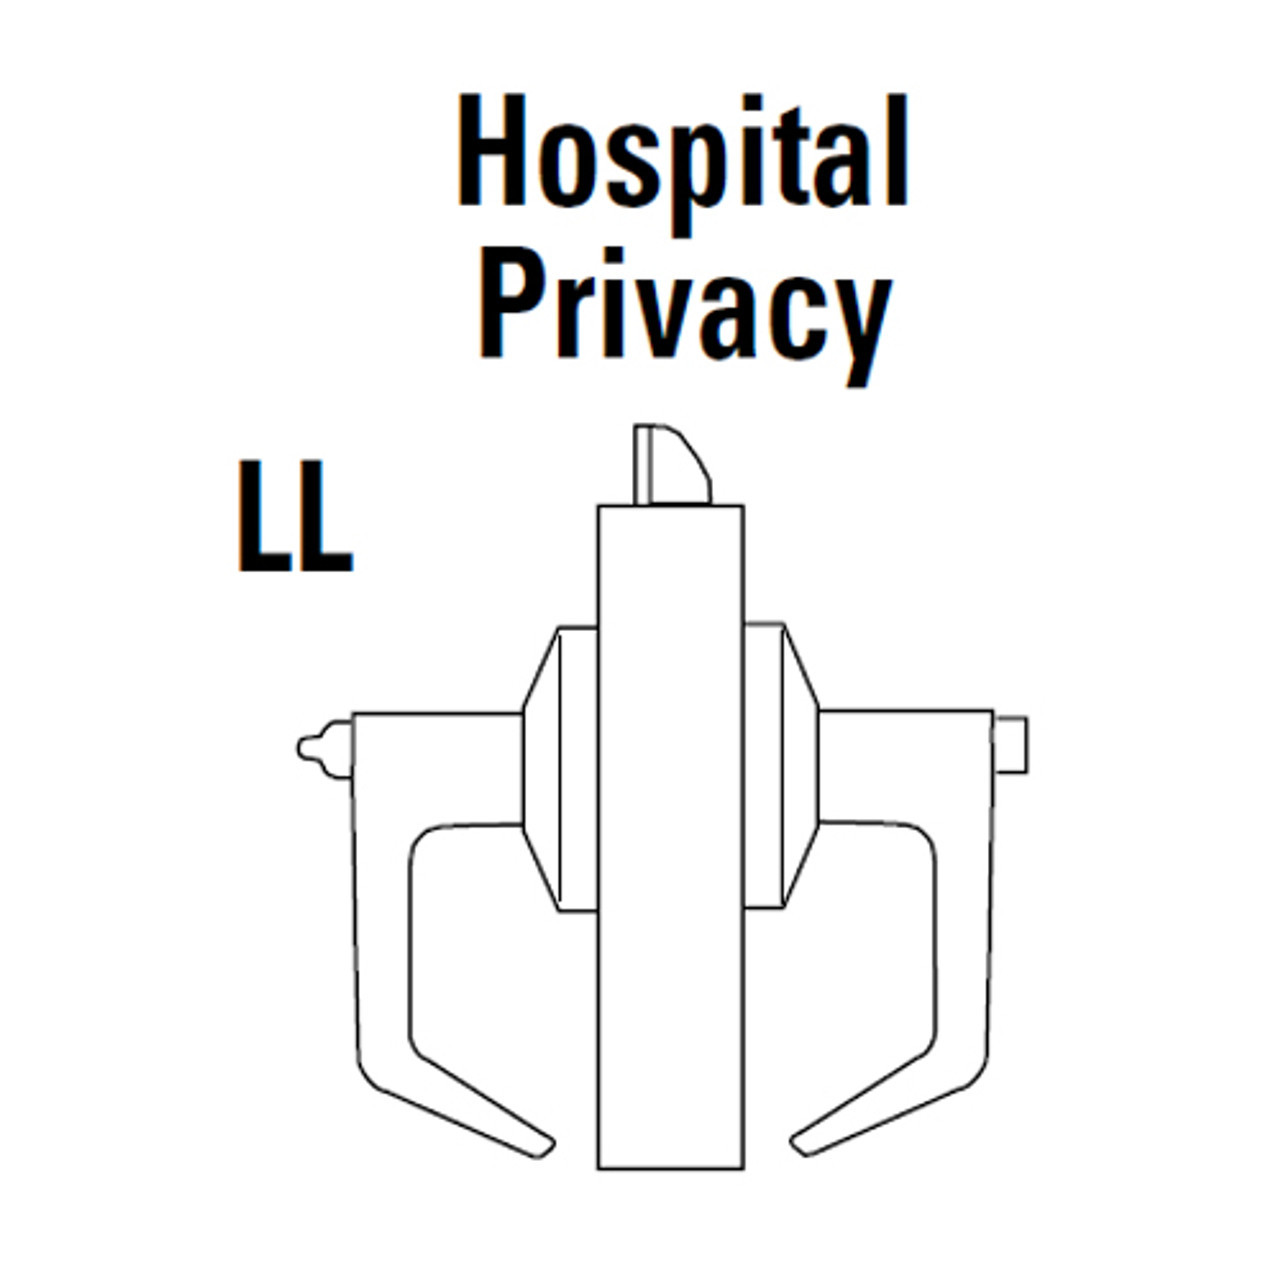 9K30LL16CS3625LM Best 9K Series Hospital Privacy Heavy Duty Cylindrical Lever Locks with Curved Without Return Lever Design in Bright Chrome